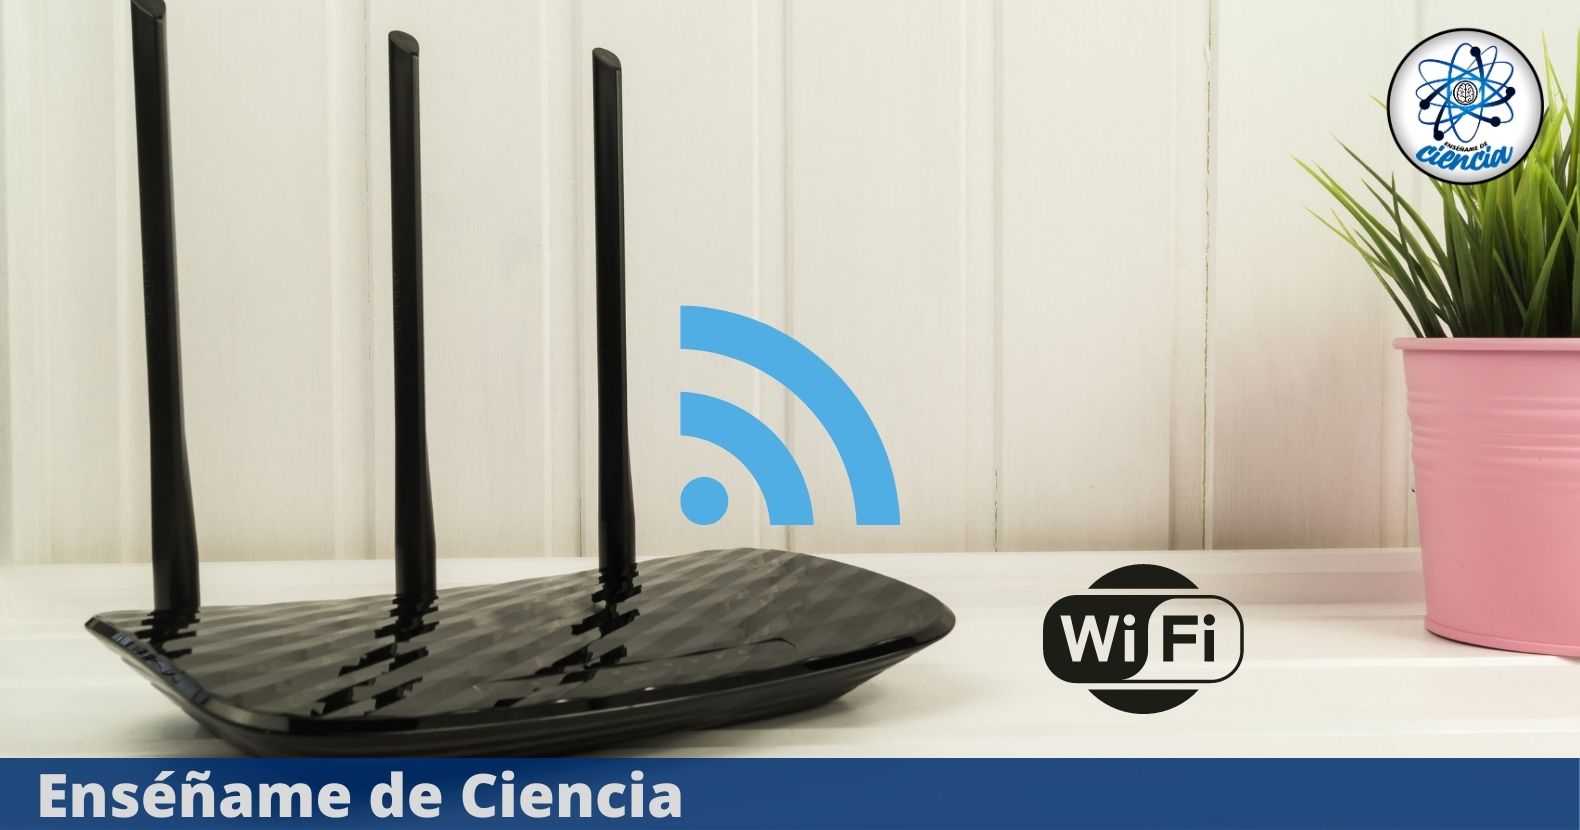 Find out the 5 reasons why your Wi-Fi drops and what to do to avoid them – Enseñame de Ciencia